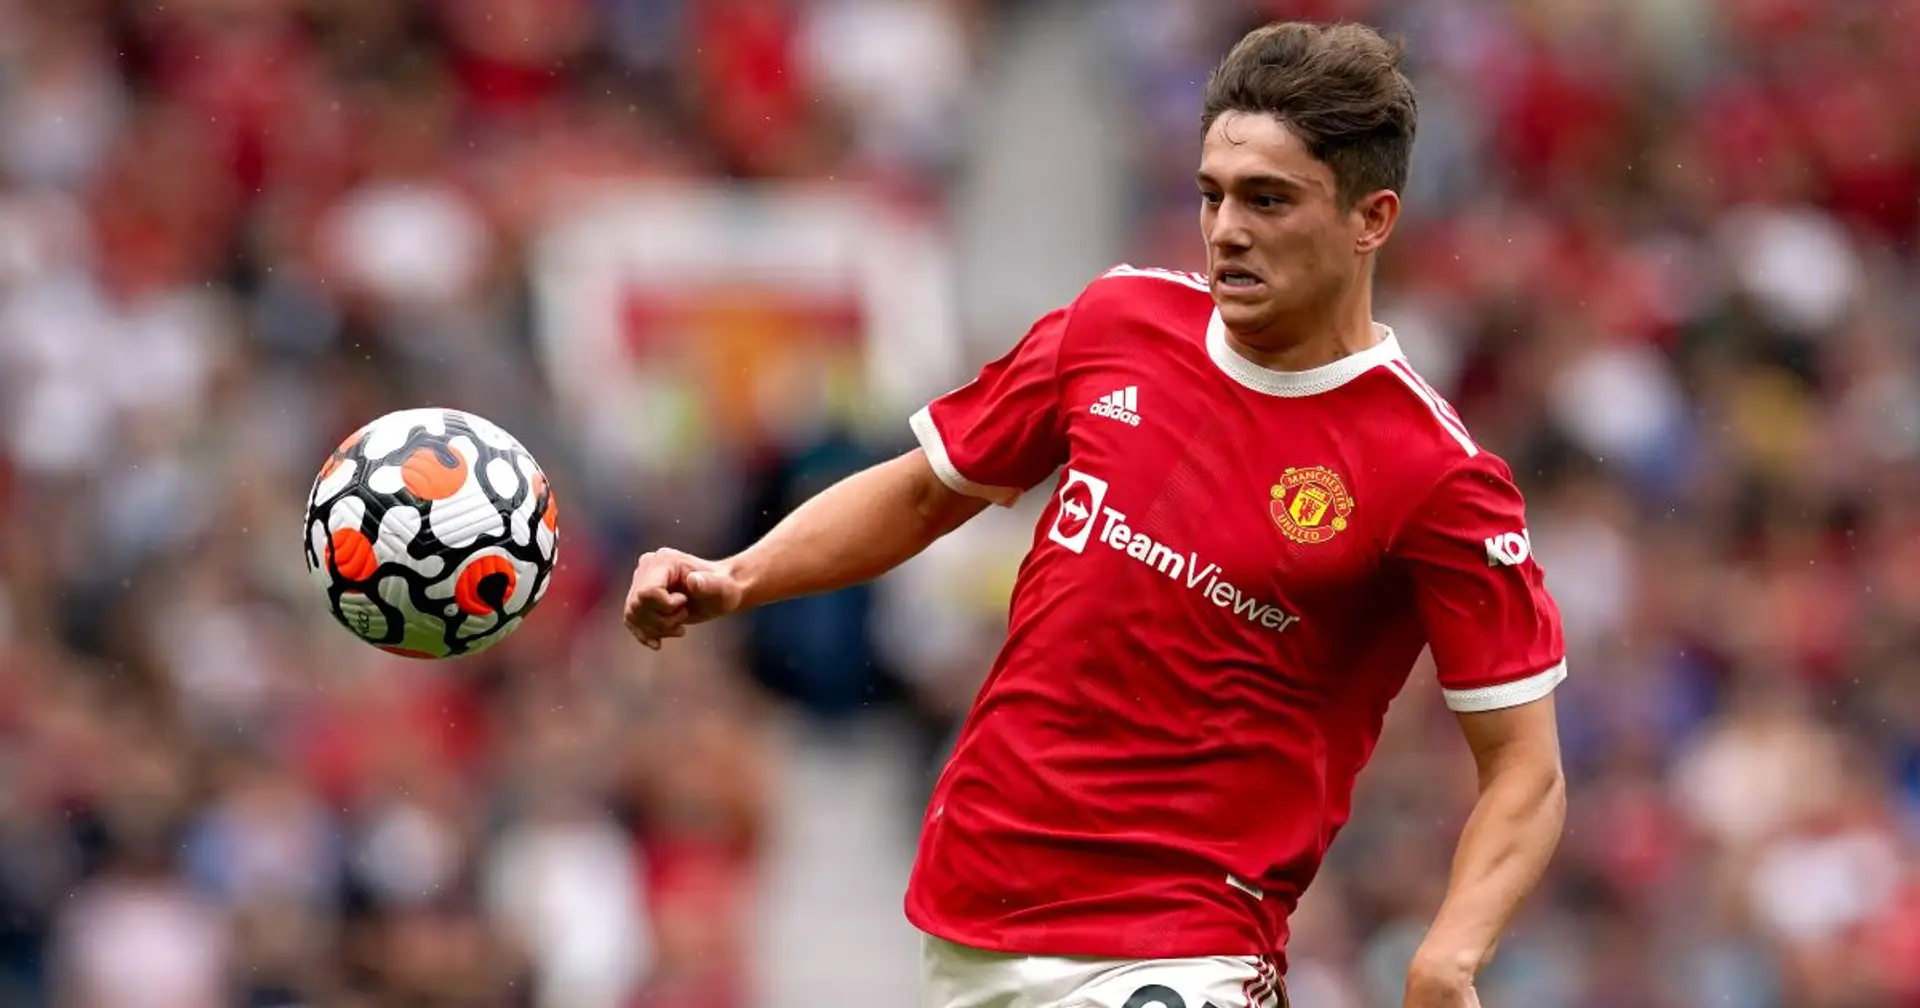 Fabrizio Romano: Daniel James' move to Leeds 'confirmed and here we go' (reliability: 5 stars)